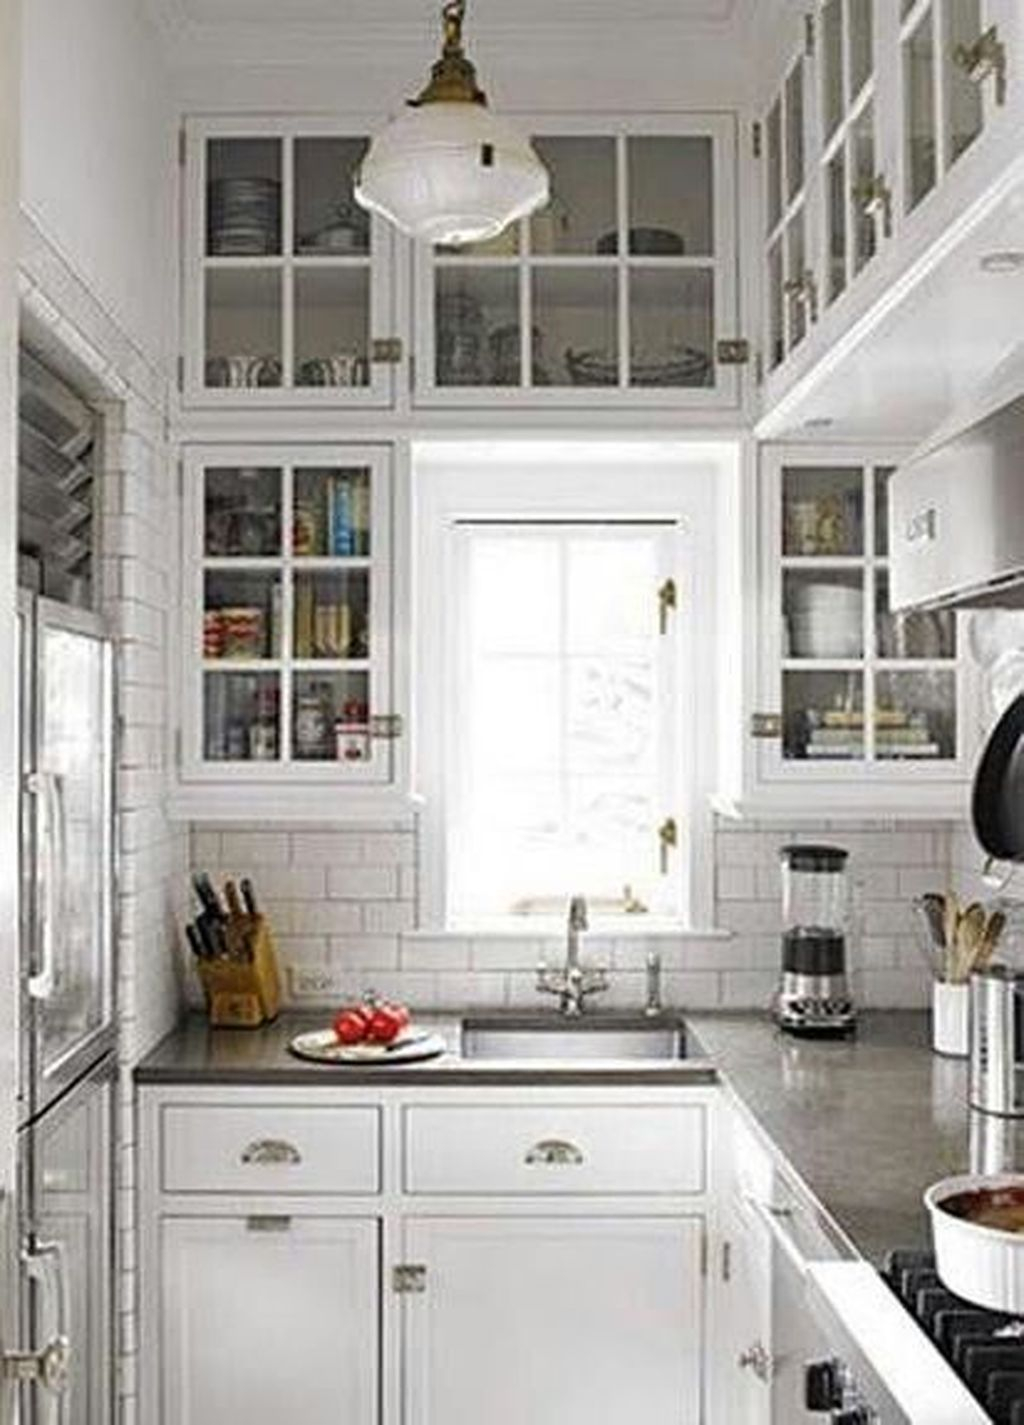 Best Tiny Kitchen Design Ideas For Your Small Space Inspiration 03